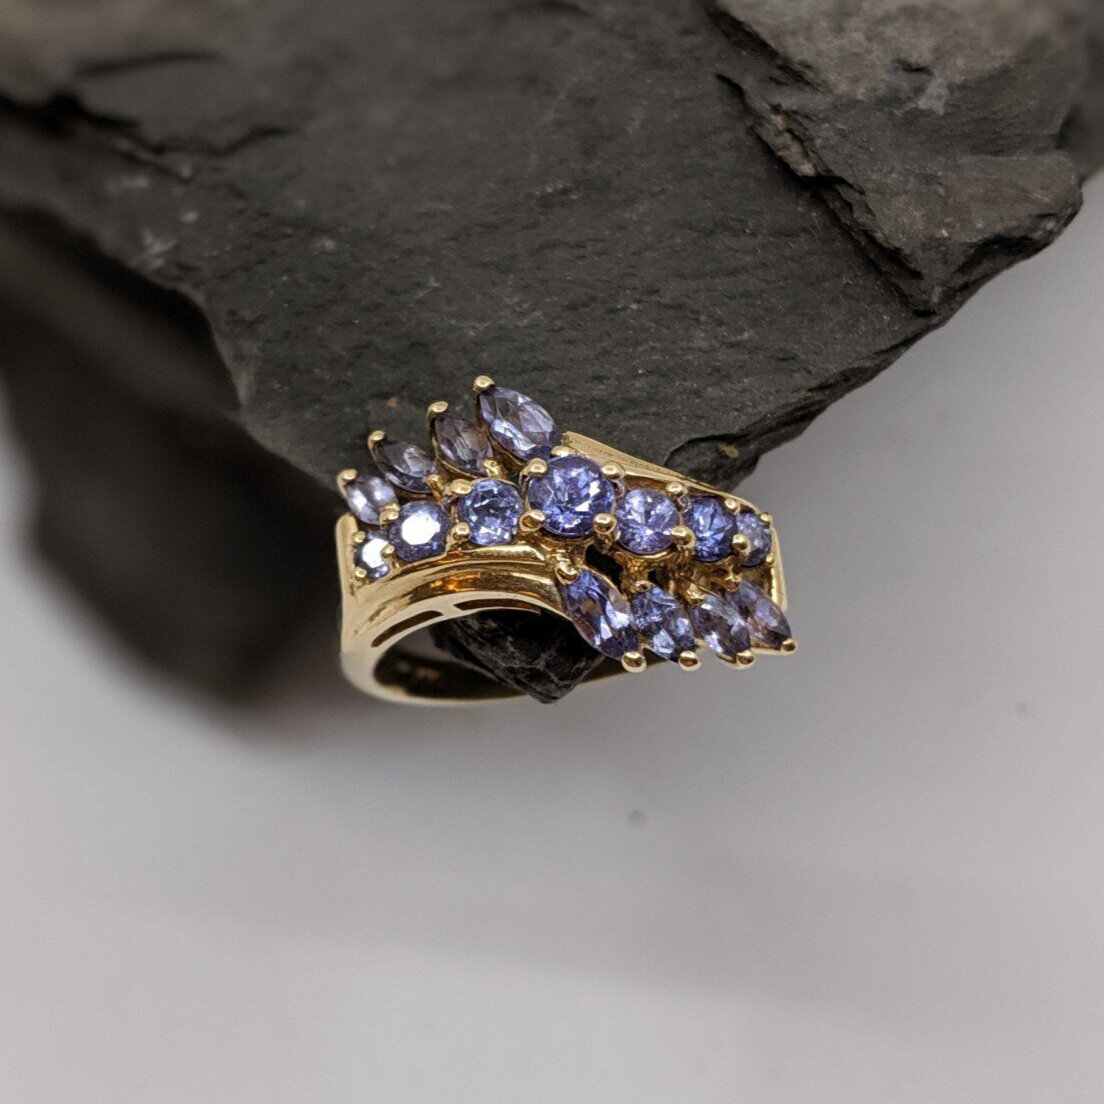 Details about   AAA TANZANITE 0.46 Cts  SLIDE PENDANT 10k YELLOW GOLD* New With Tag * 